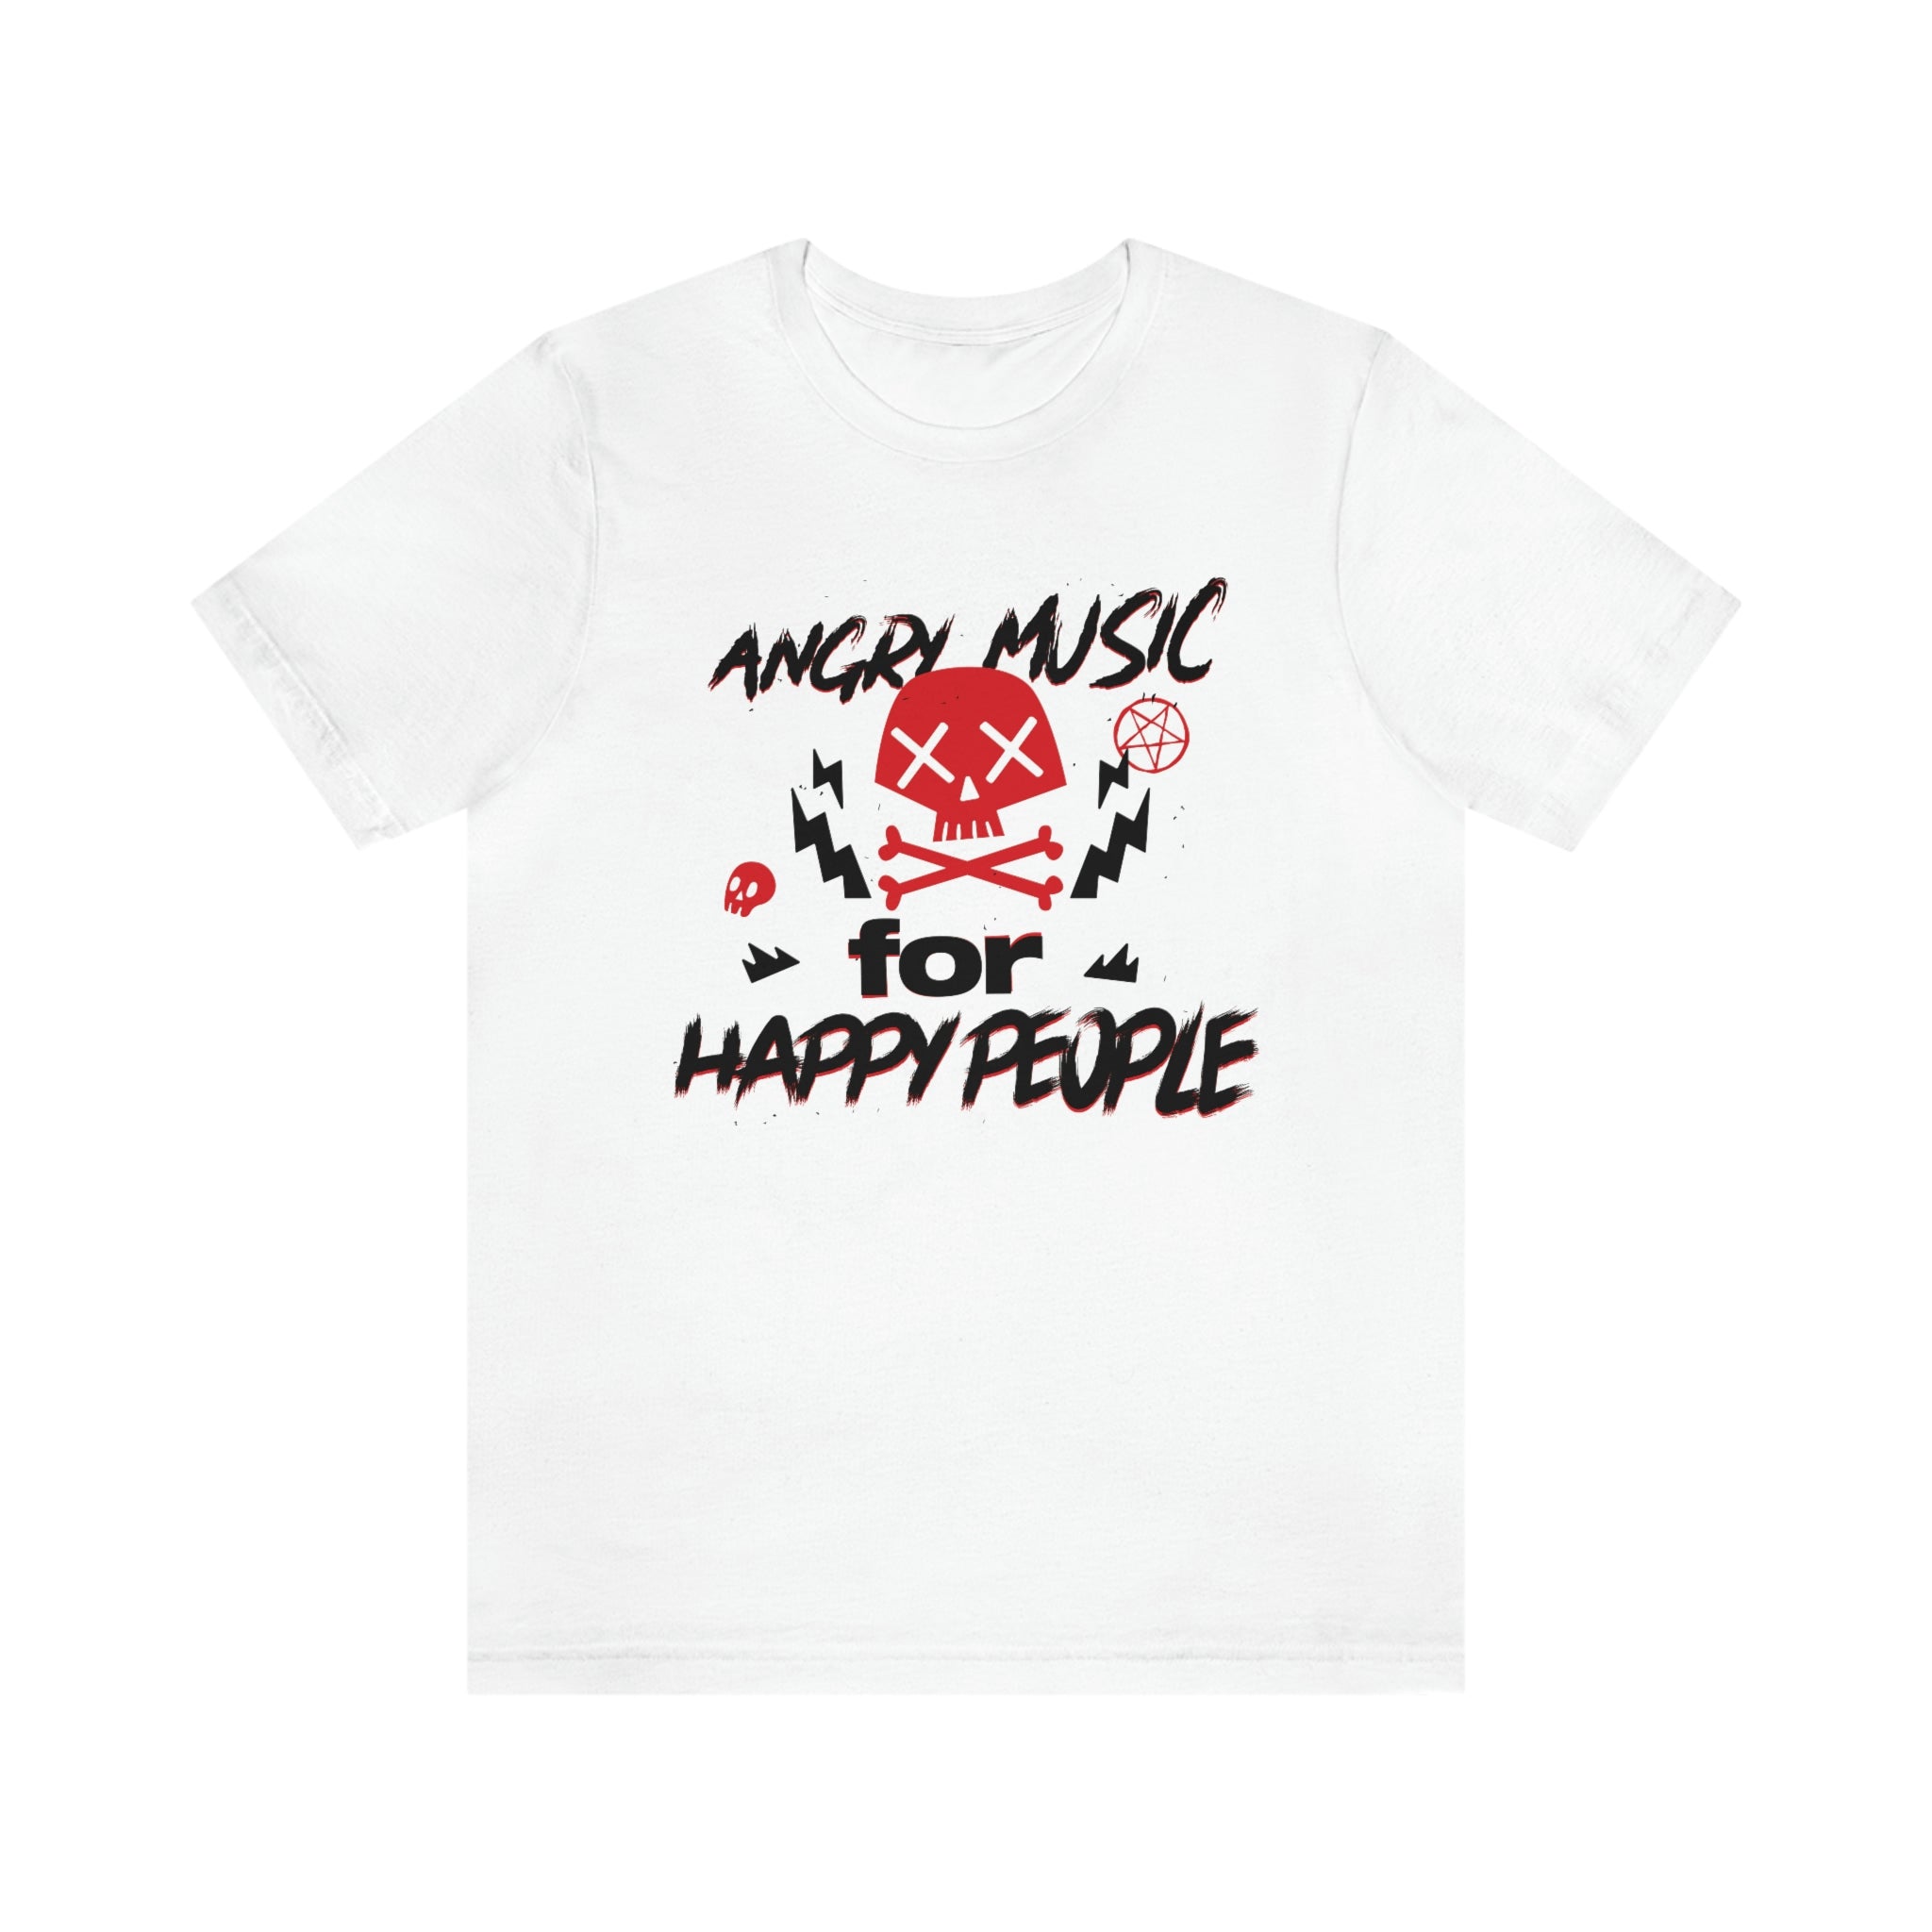 Angry Music for Happy People : Unisex 100% Premium Cotton T-Shirt by Bella+Canvas